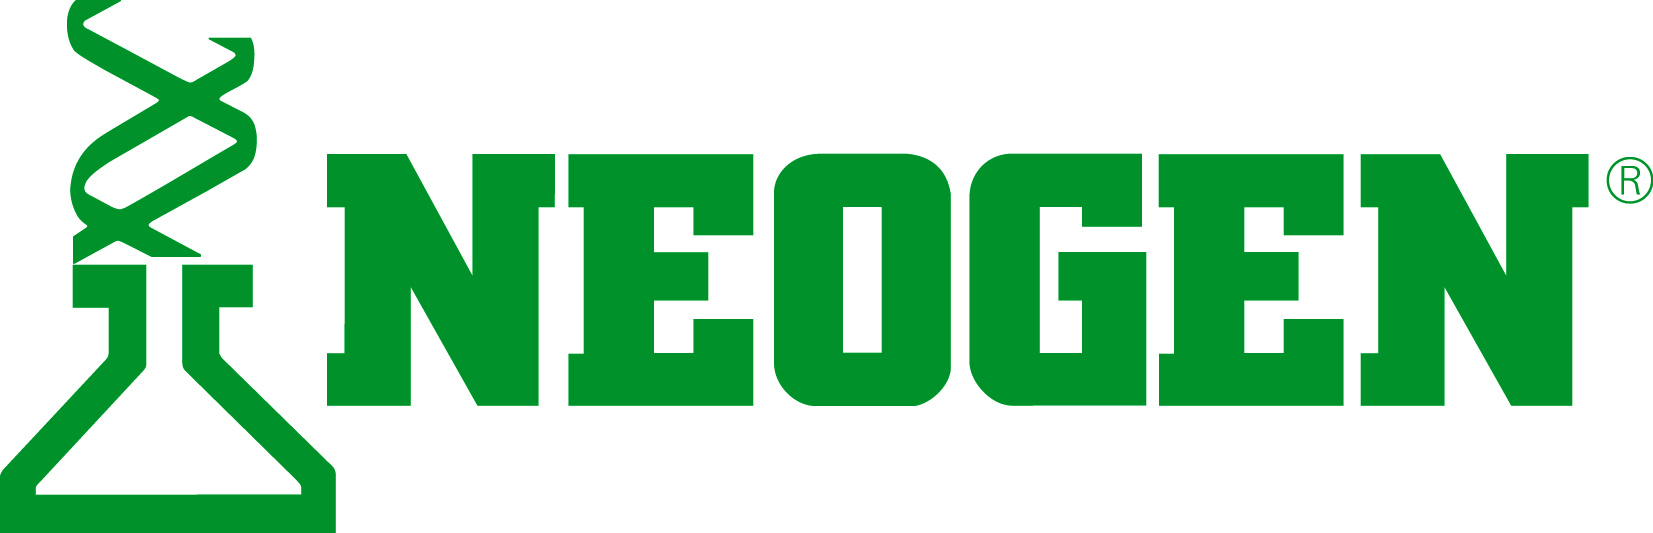 A green logo of eog is shown.